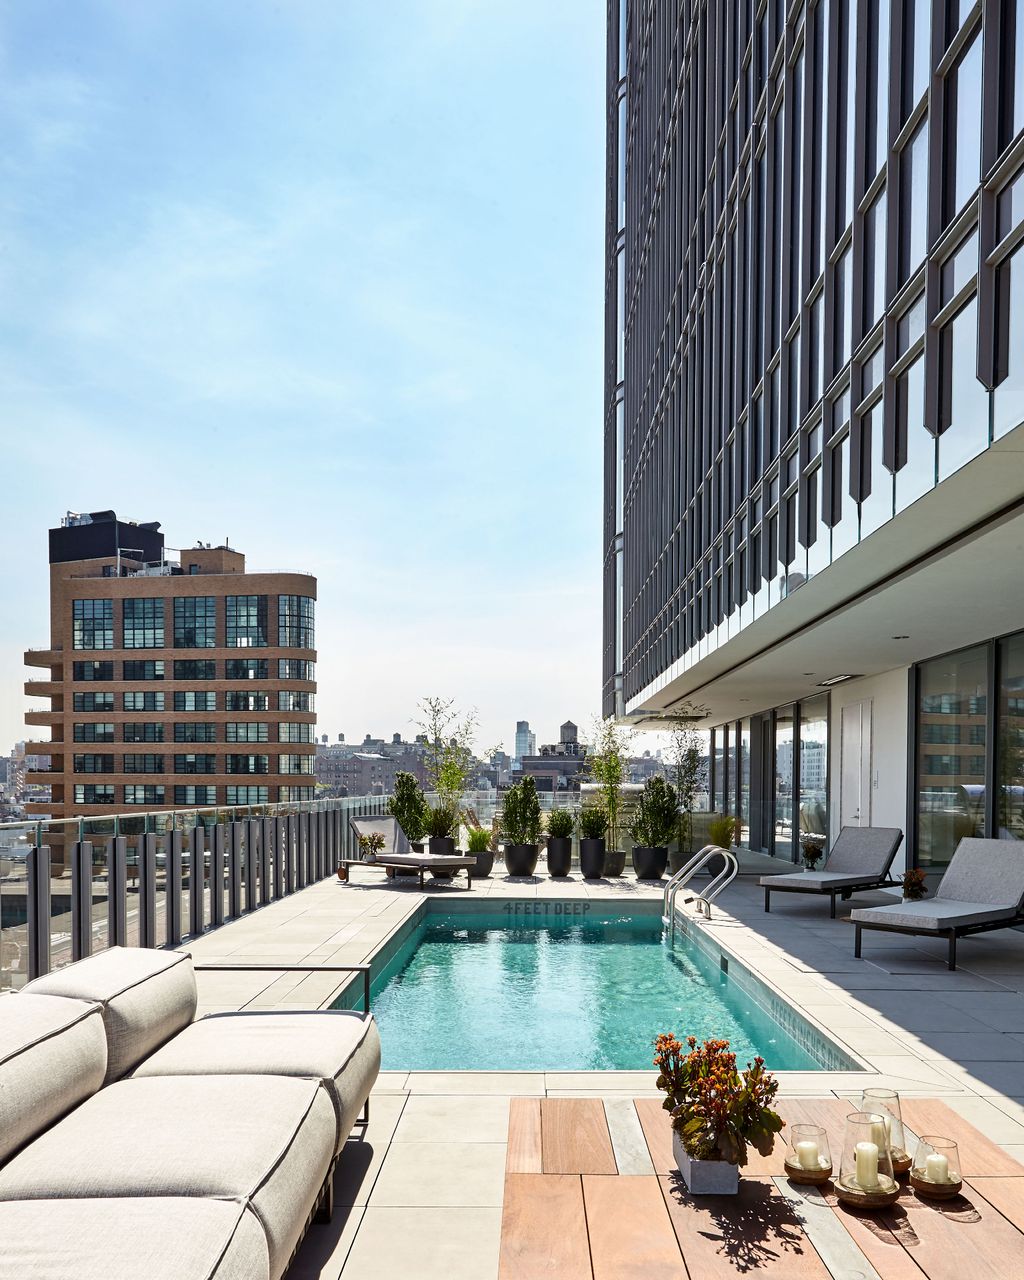 565 Broome by Renzo Piano completes | Wallpaper